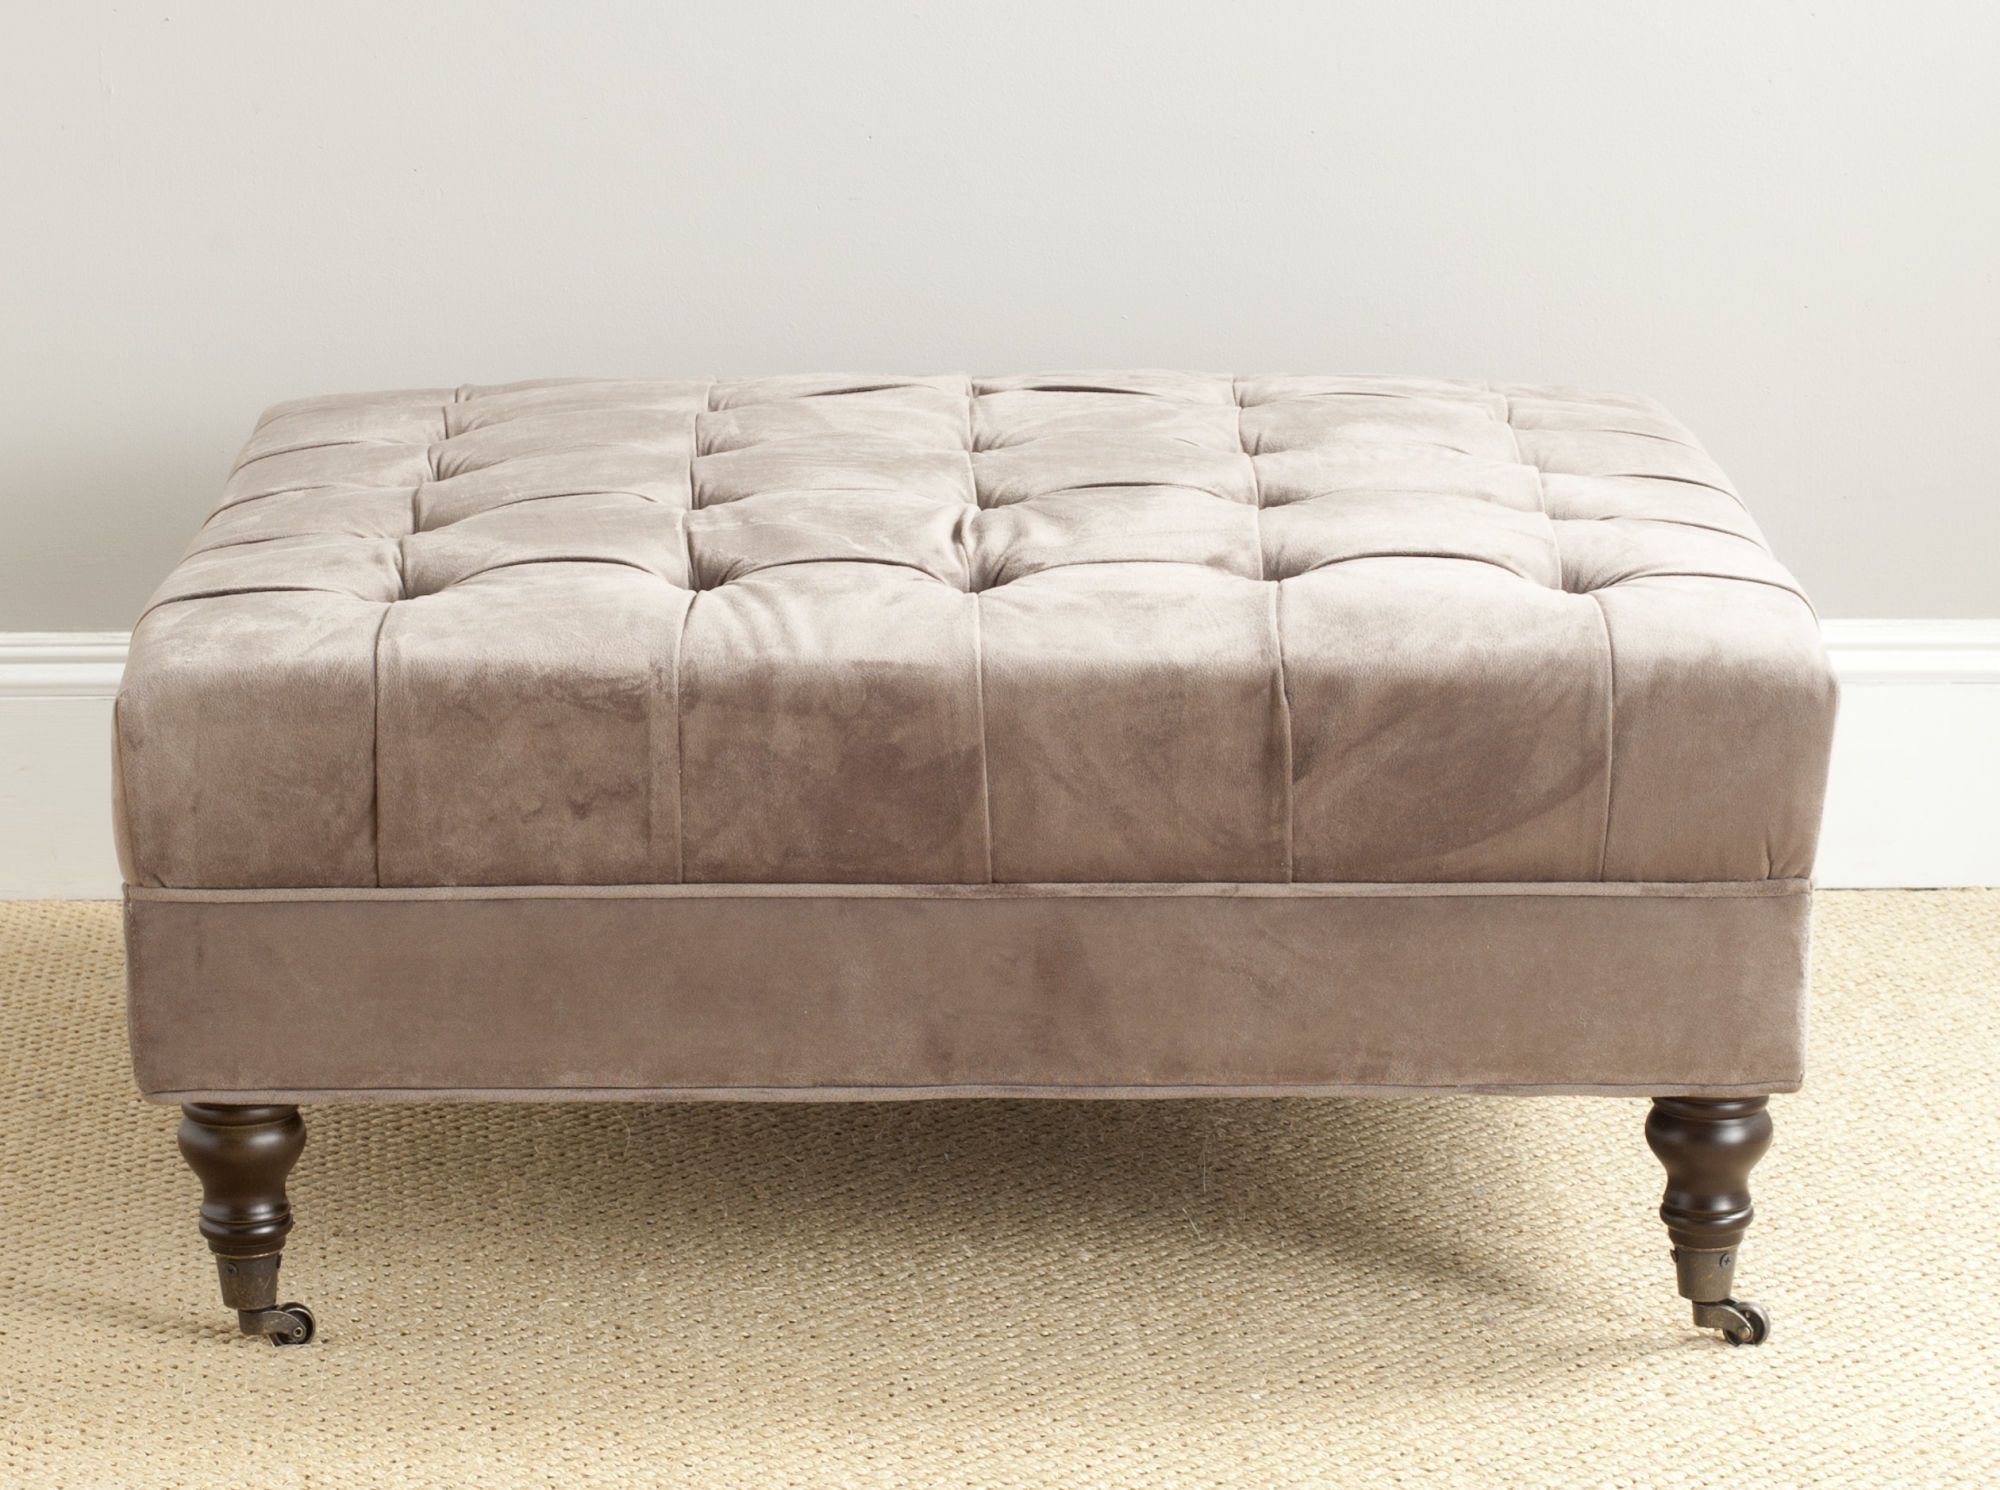 Clark Tufted Cocktail Ottoman Intended For Well Known Tufted Fabric Cocktail Ottomans (View 5 of 10)